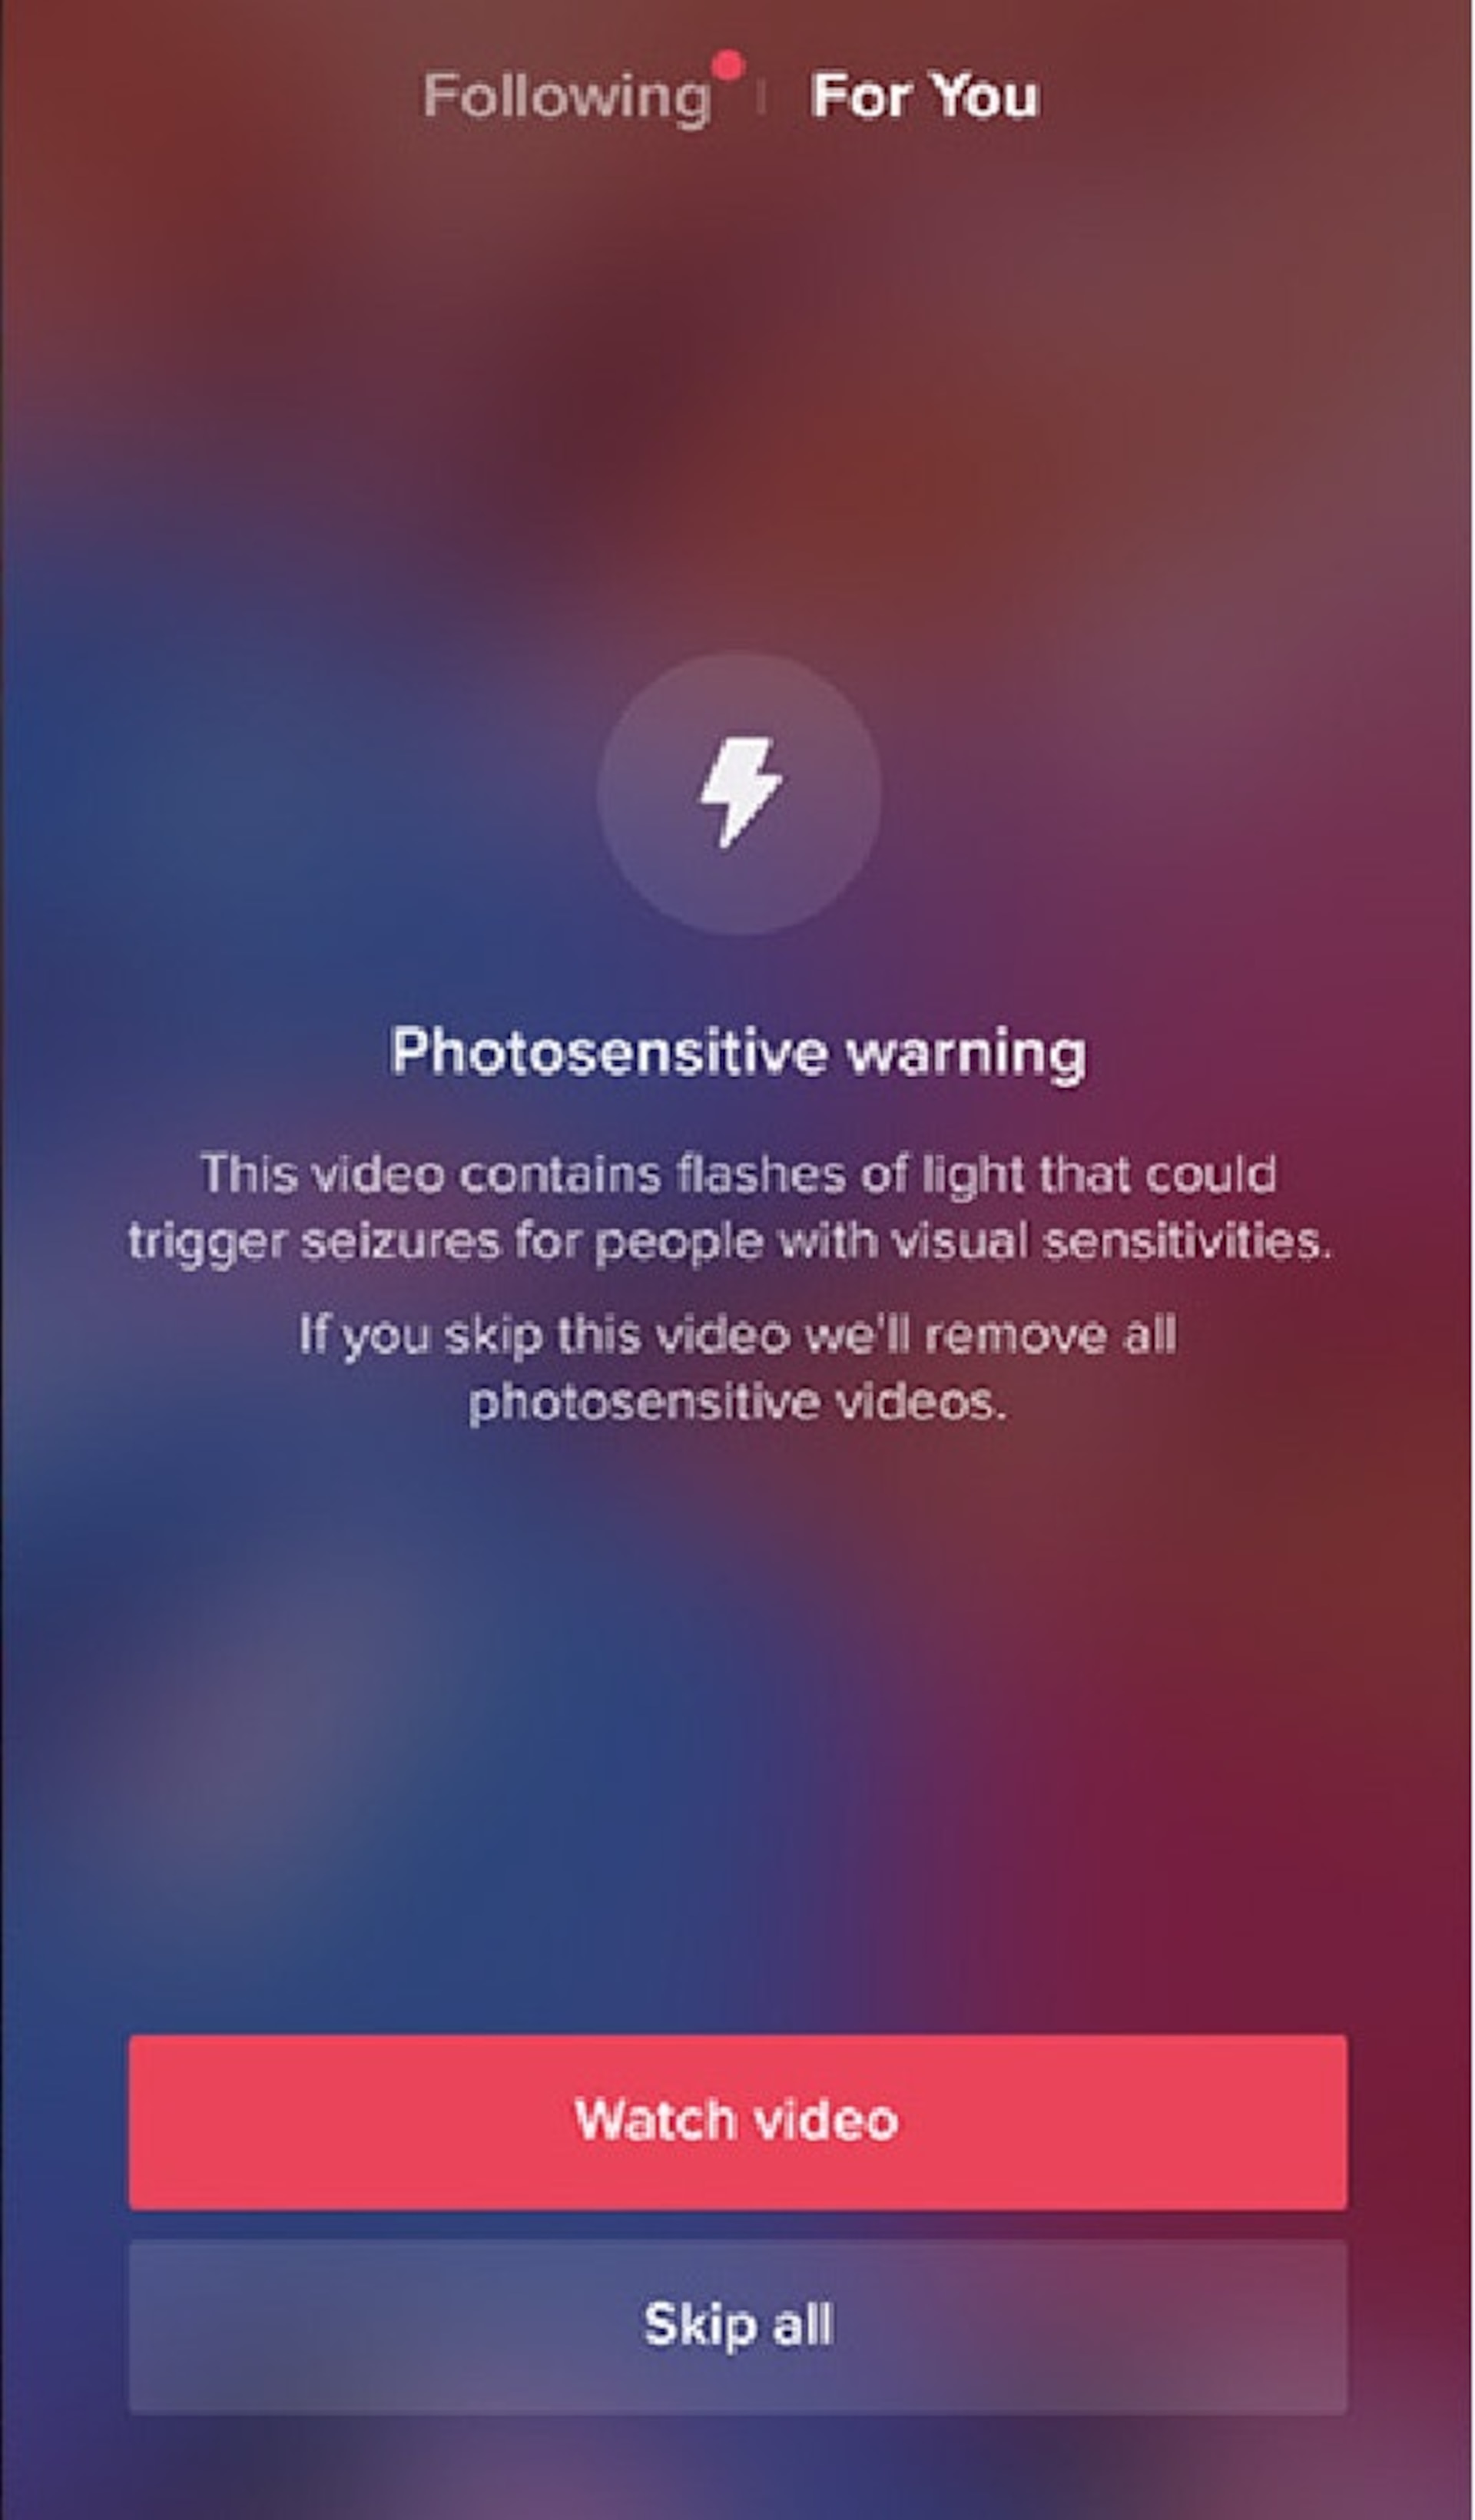 This screenshot is an example of a photosensitive warning feature available in the social media application TikTok. It allows users the option to automatically hide sensitive photosensitive videos.